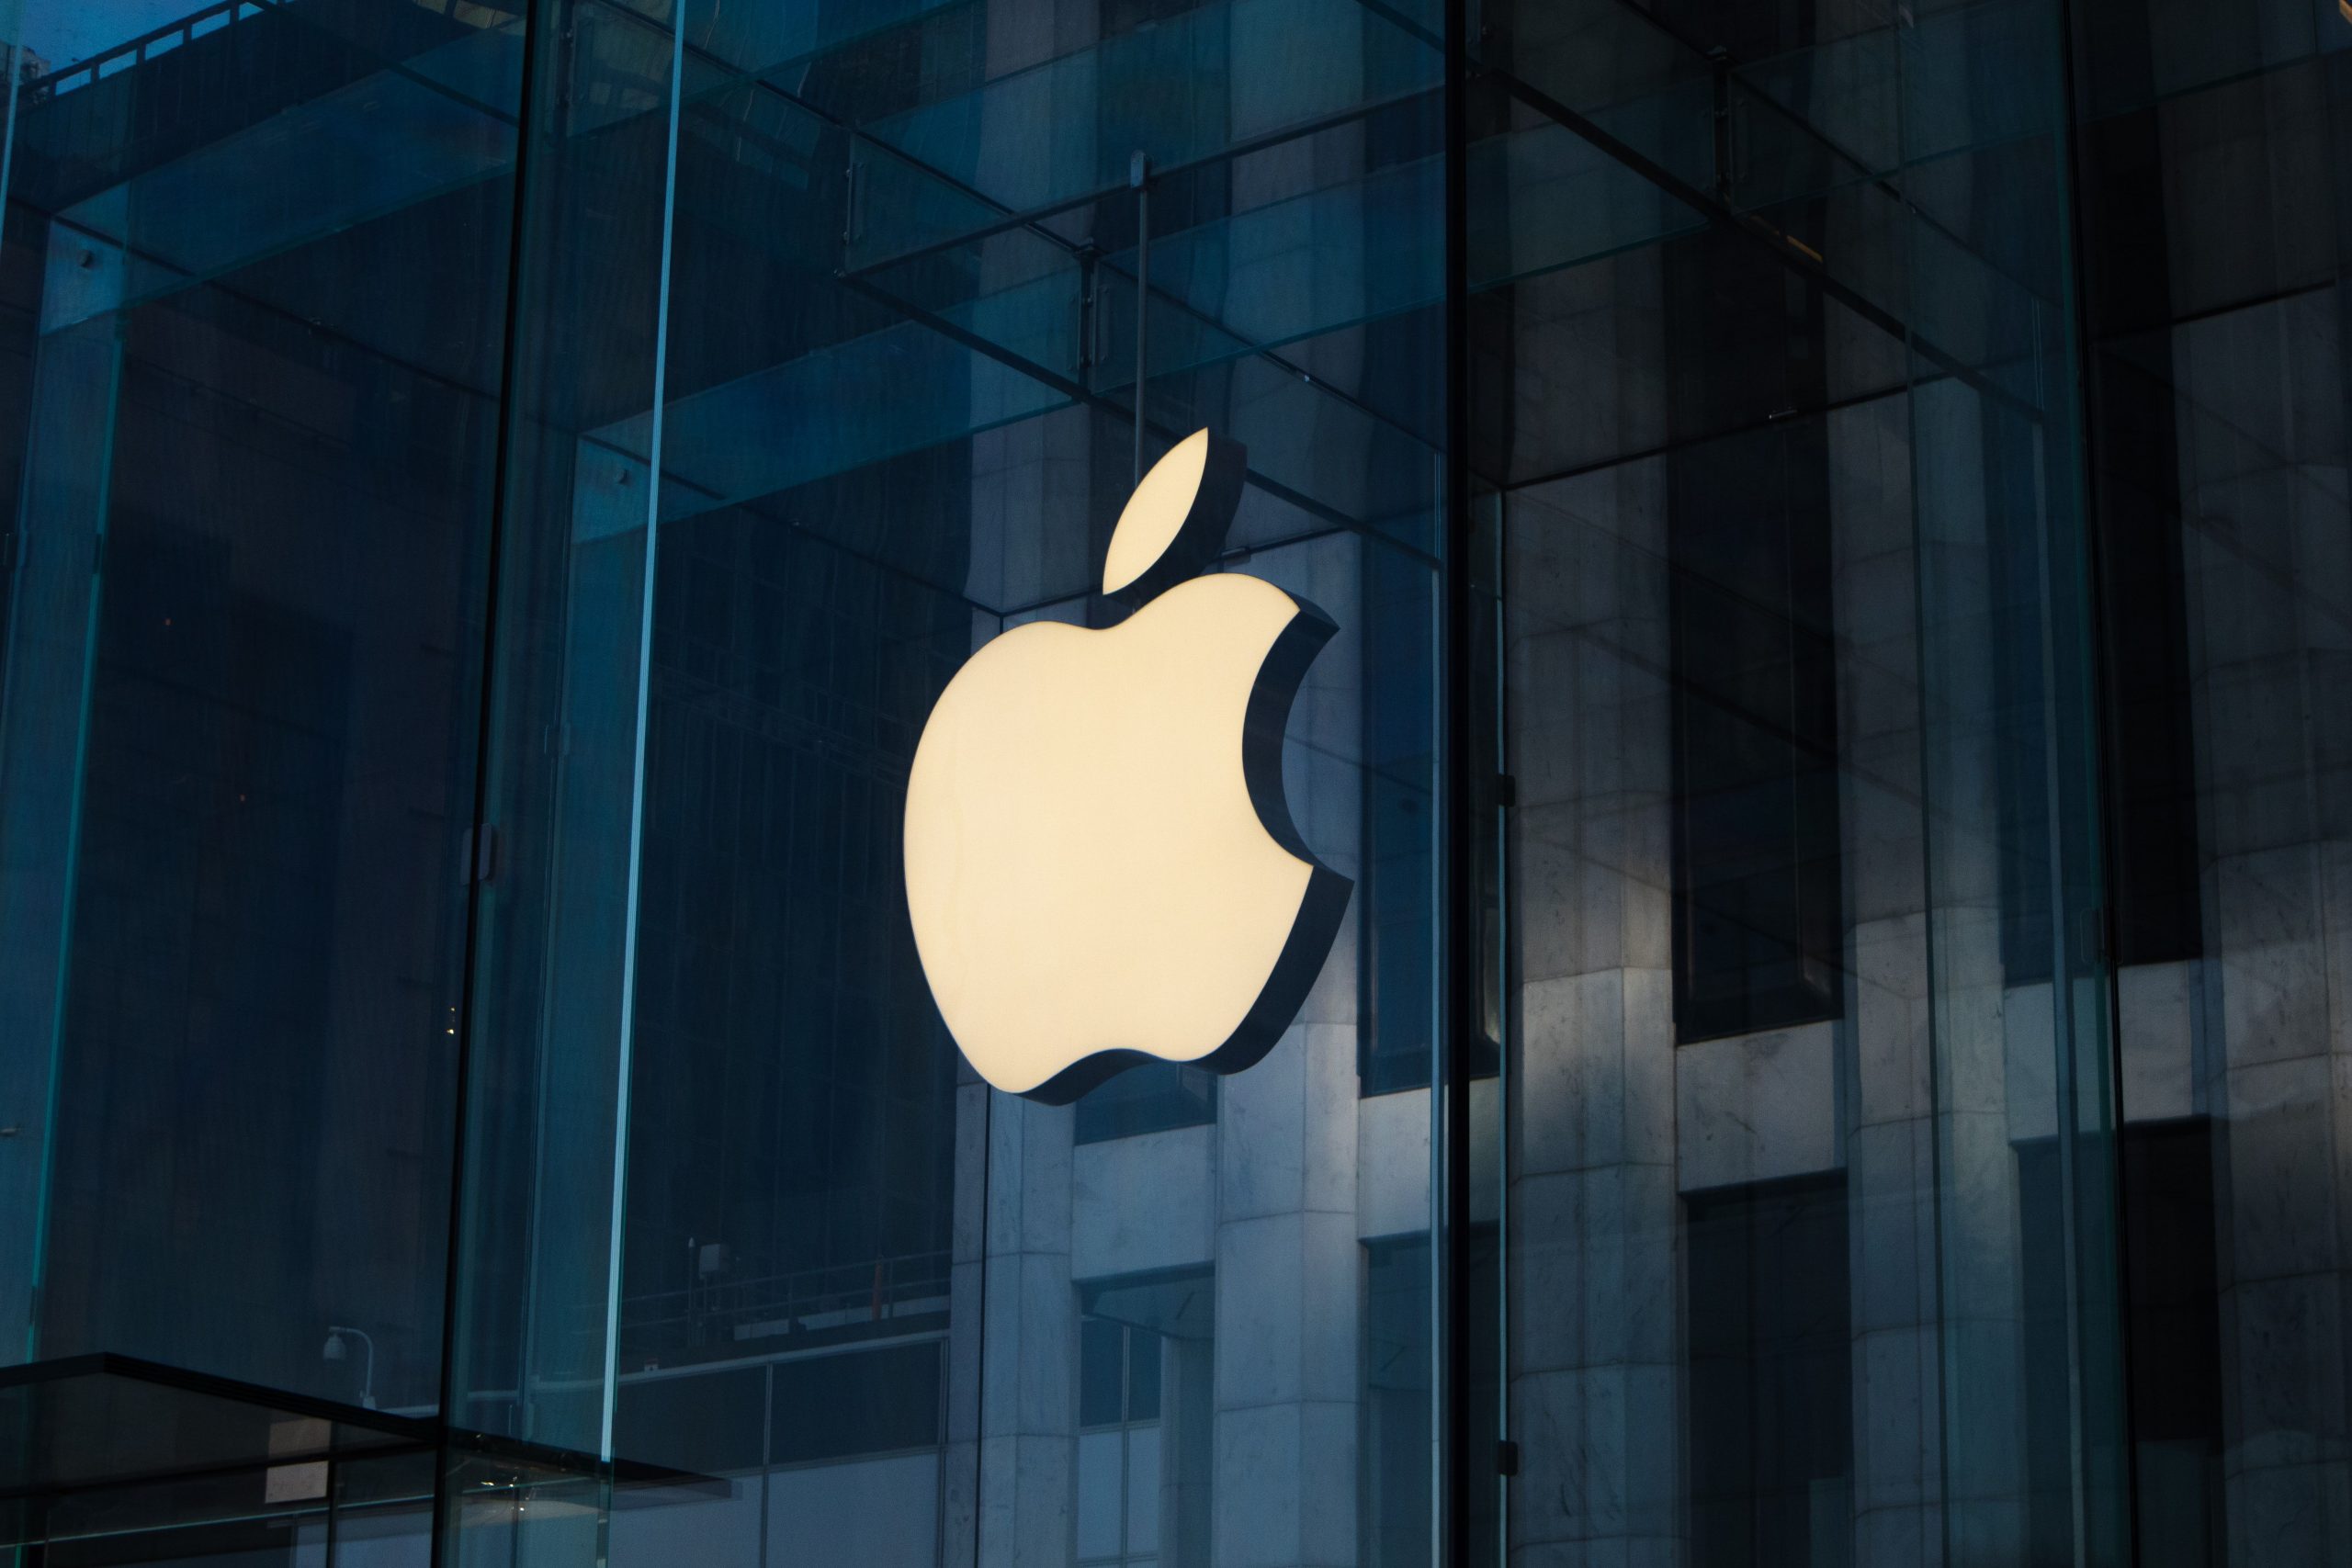 Ukraine crisis: Apple pauses all product sales in Russia